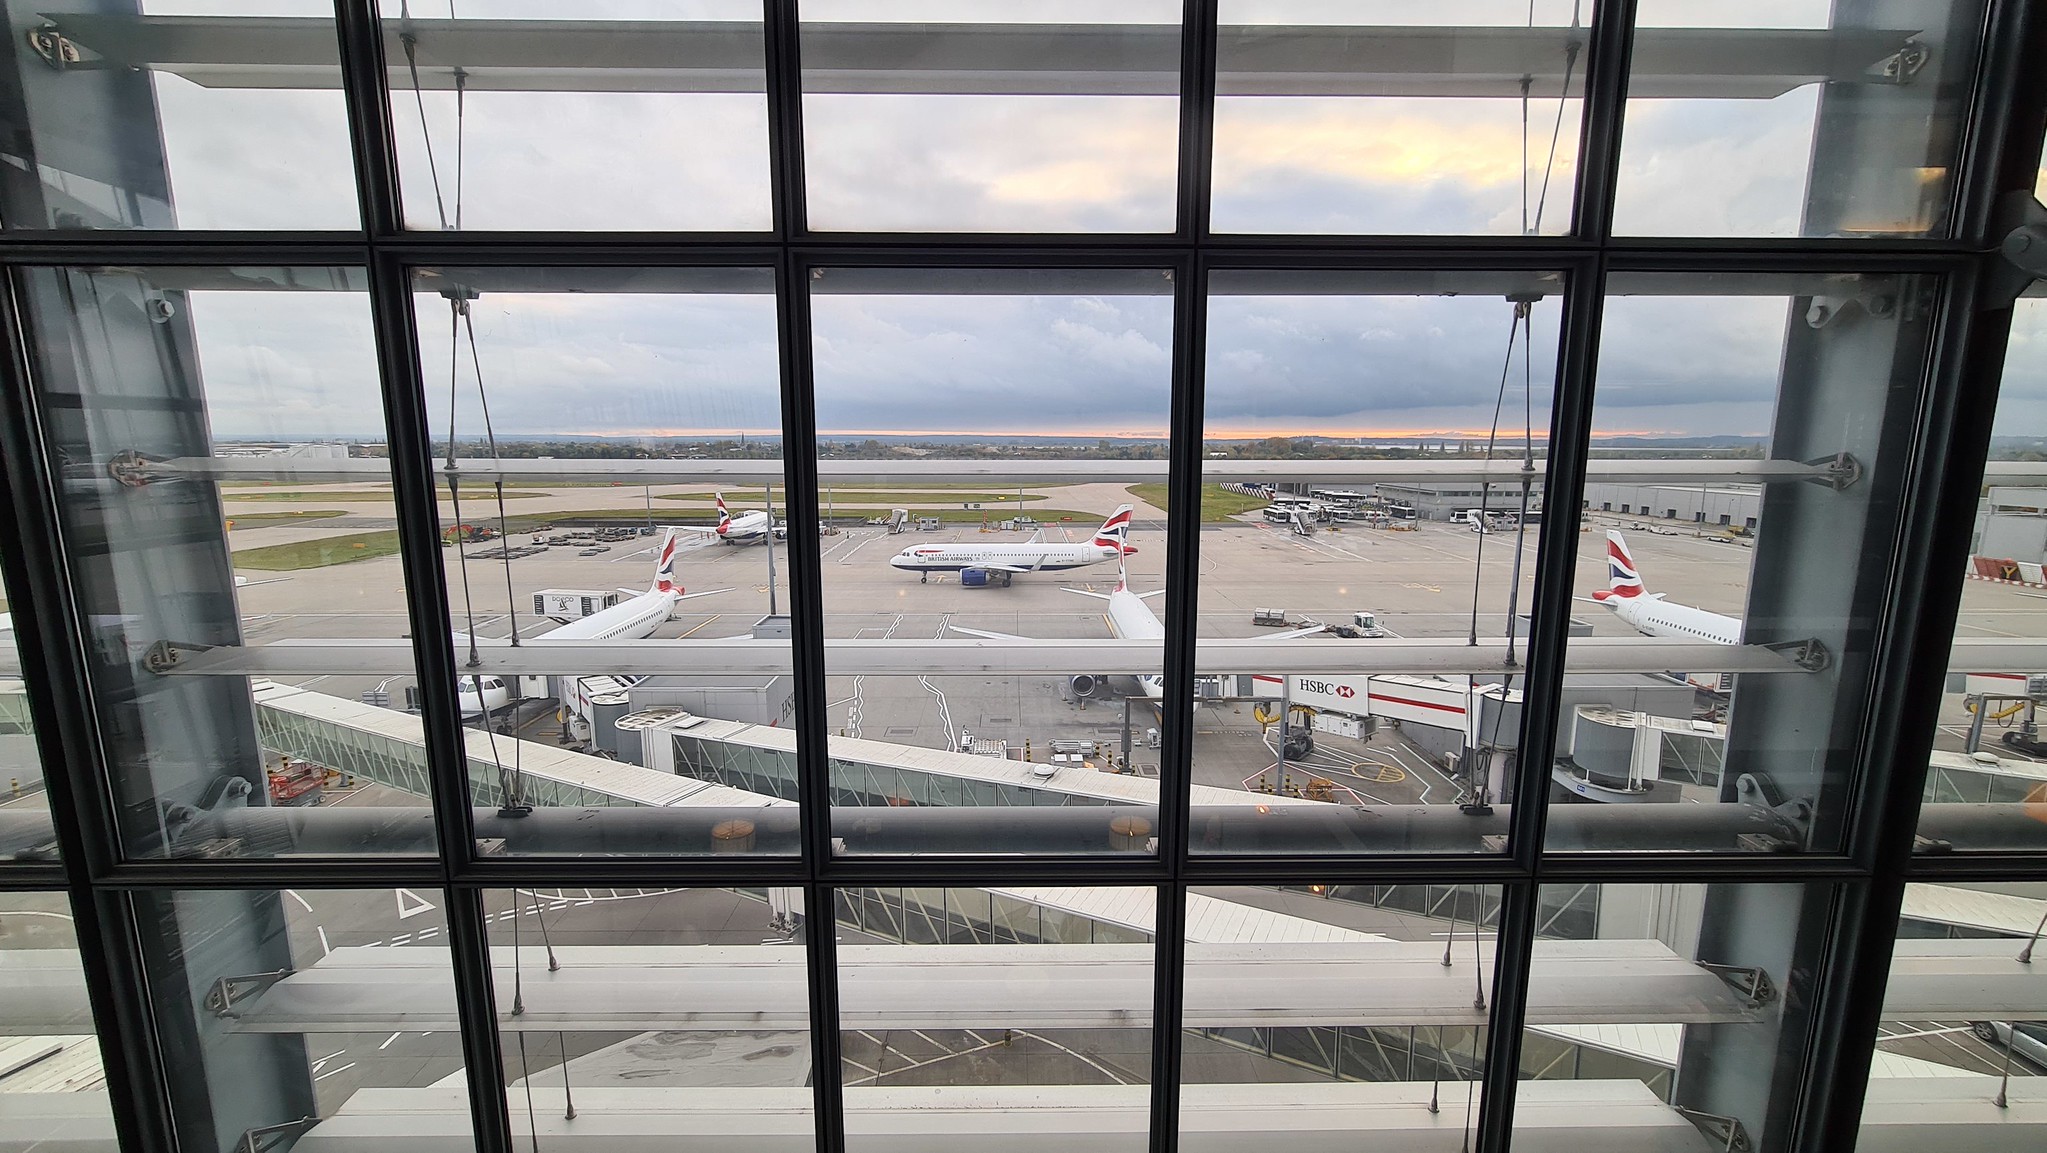 A view from the CCR Terrace at London Heathrow